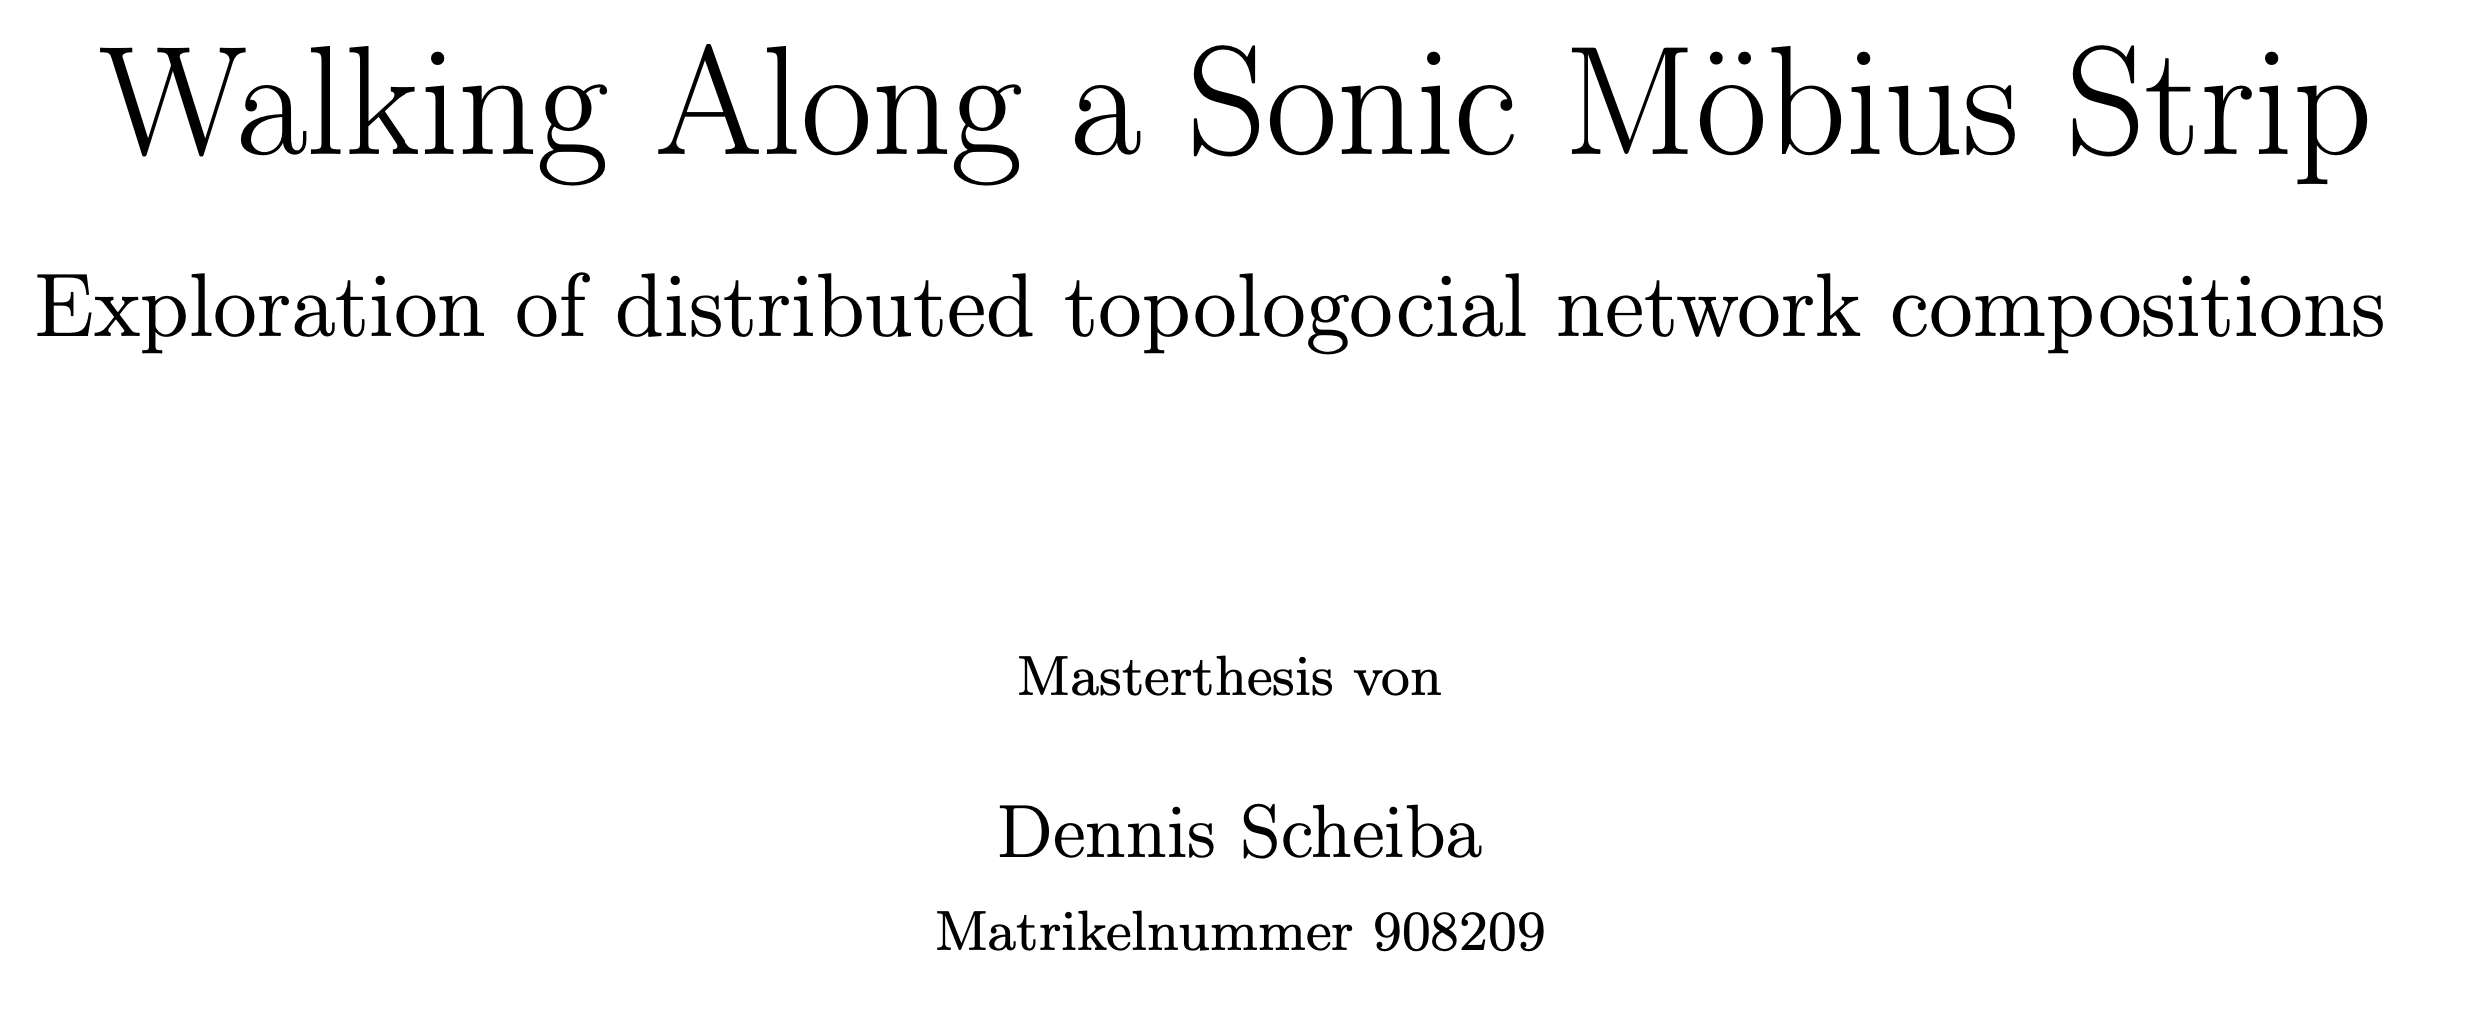 Master thesis title